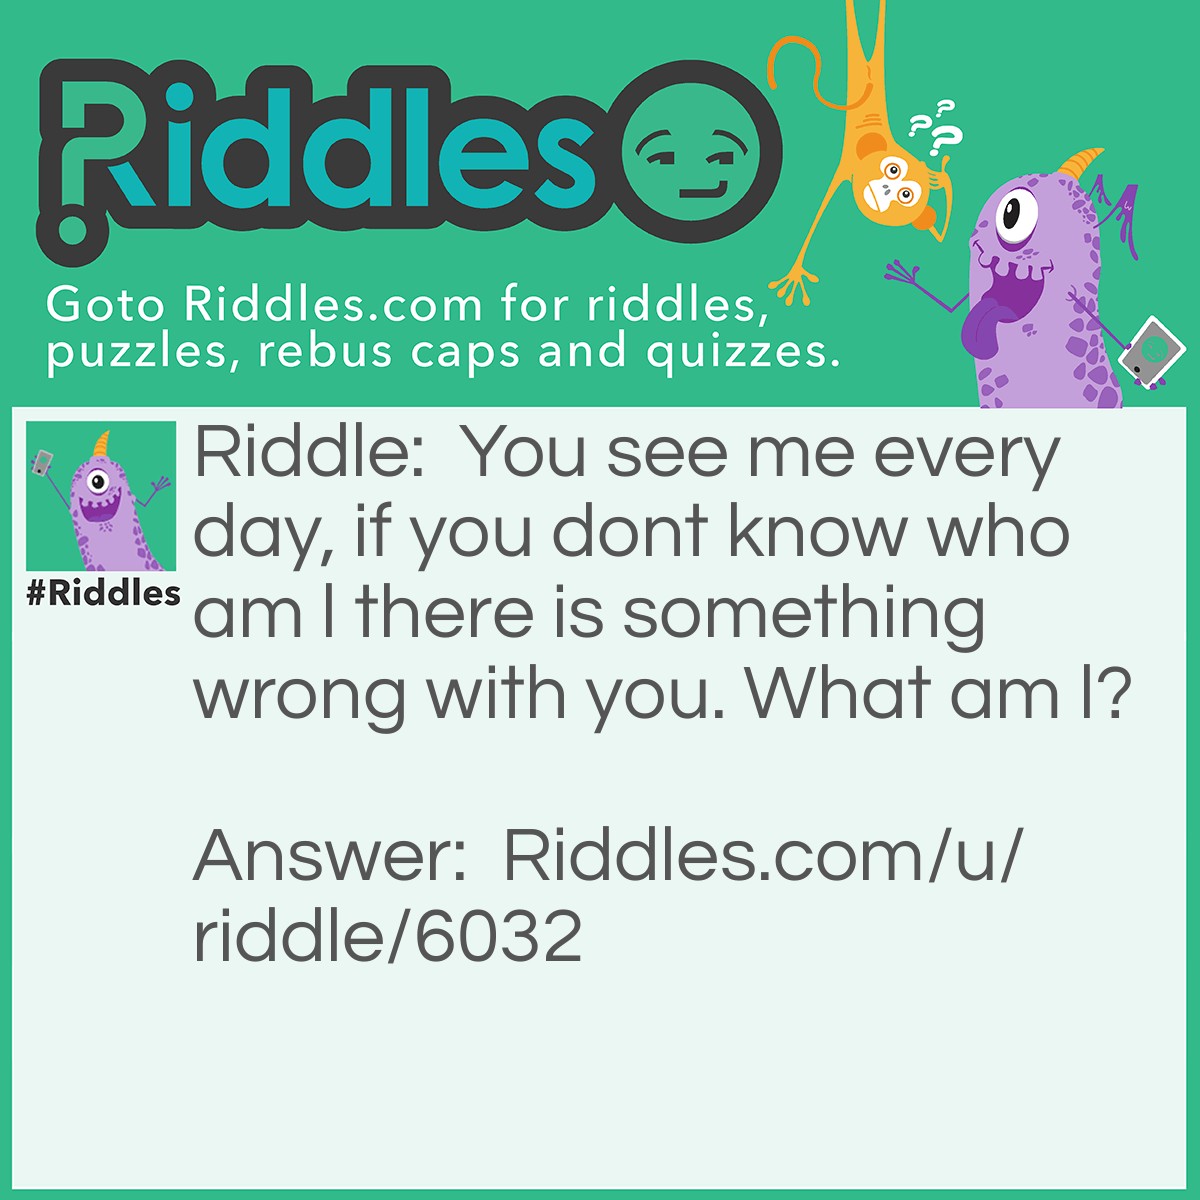 Riddle: You see me every day, if you don't know who am l there is something wrong with you. What am l? Answer: A person.